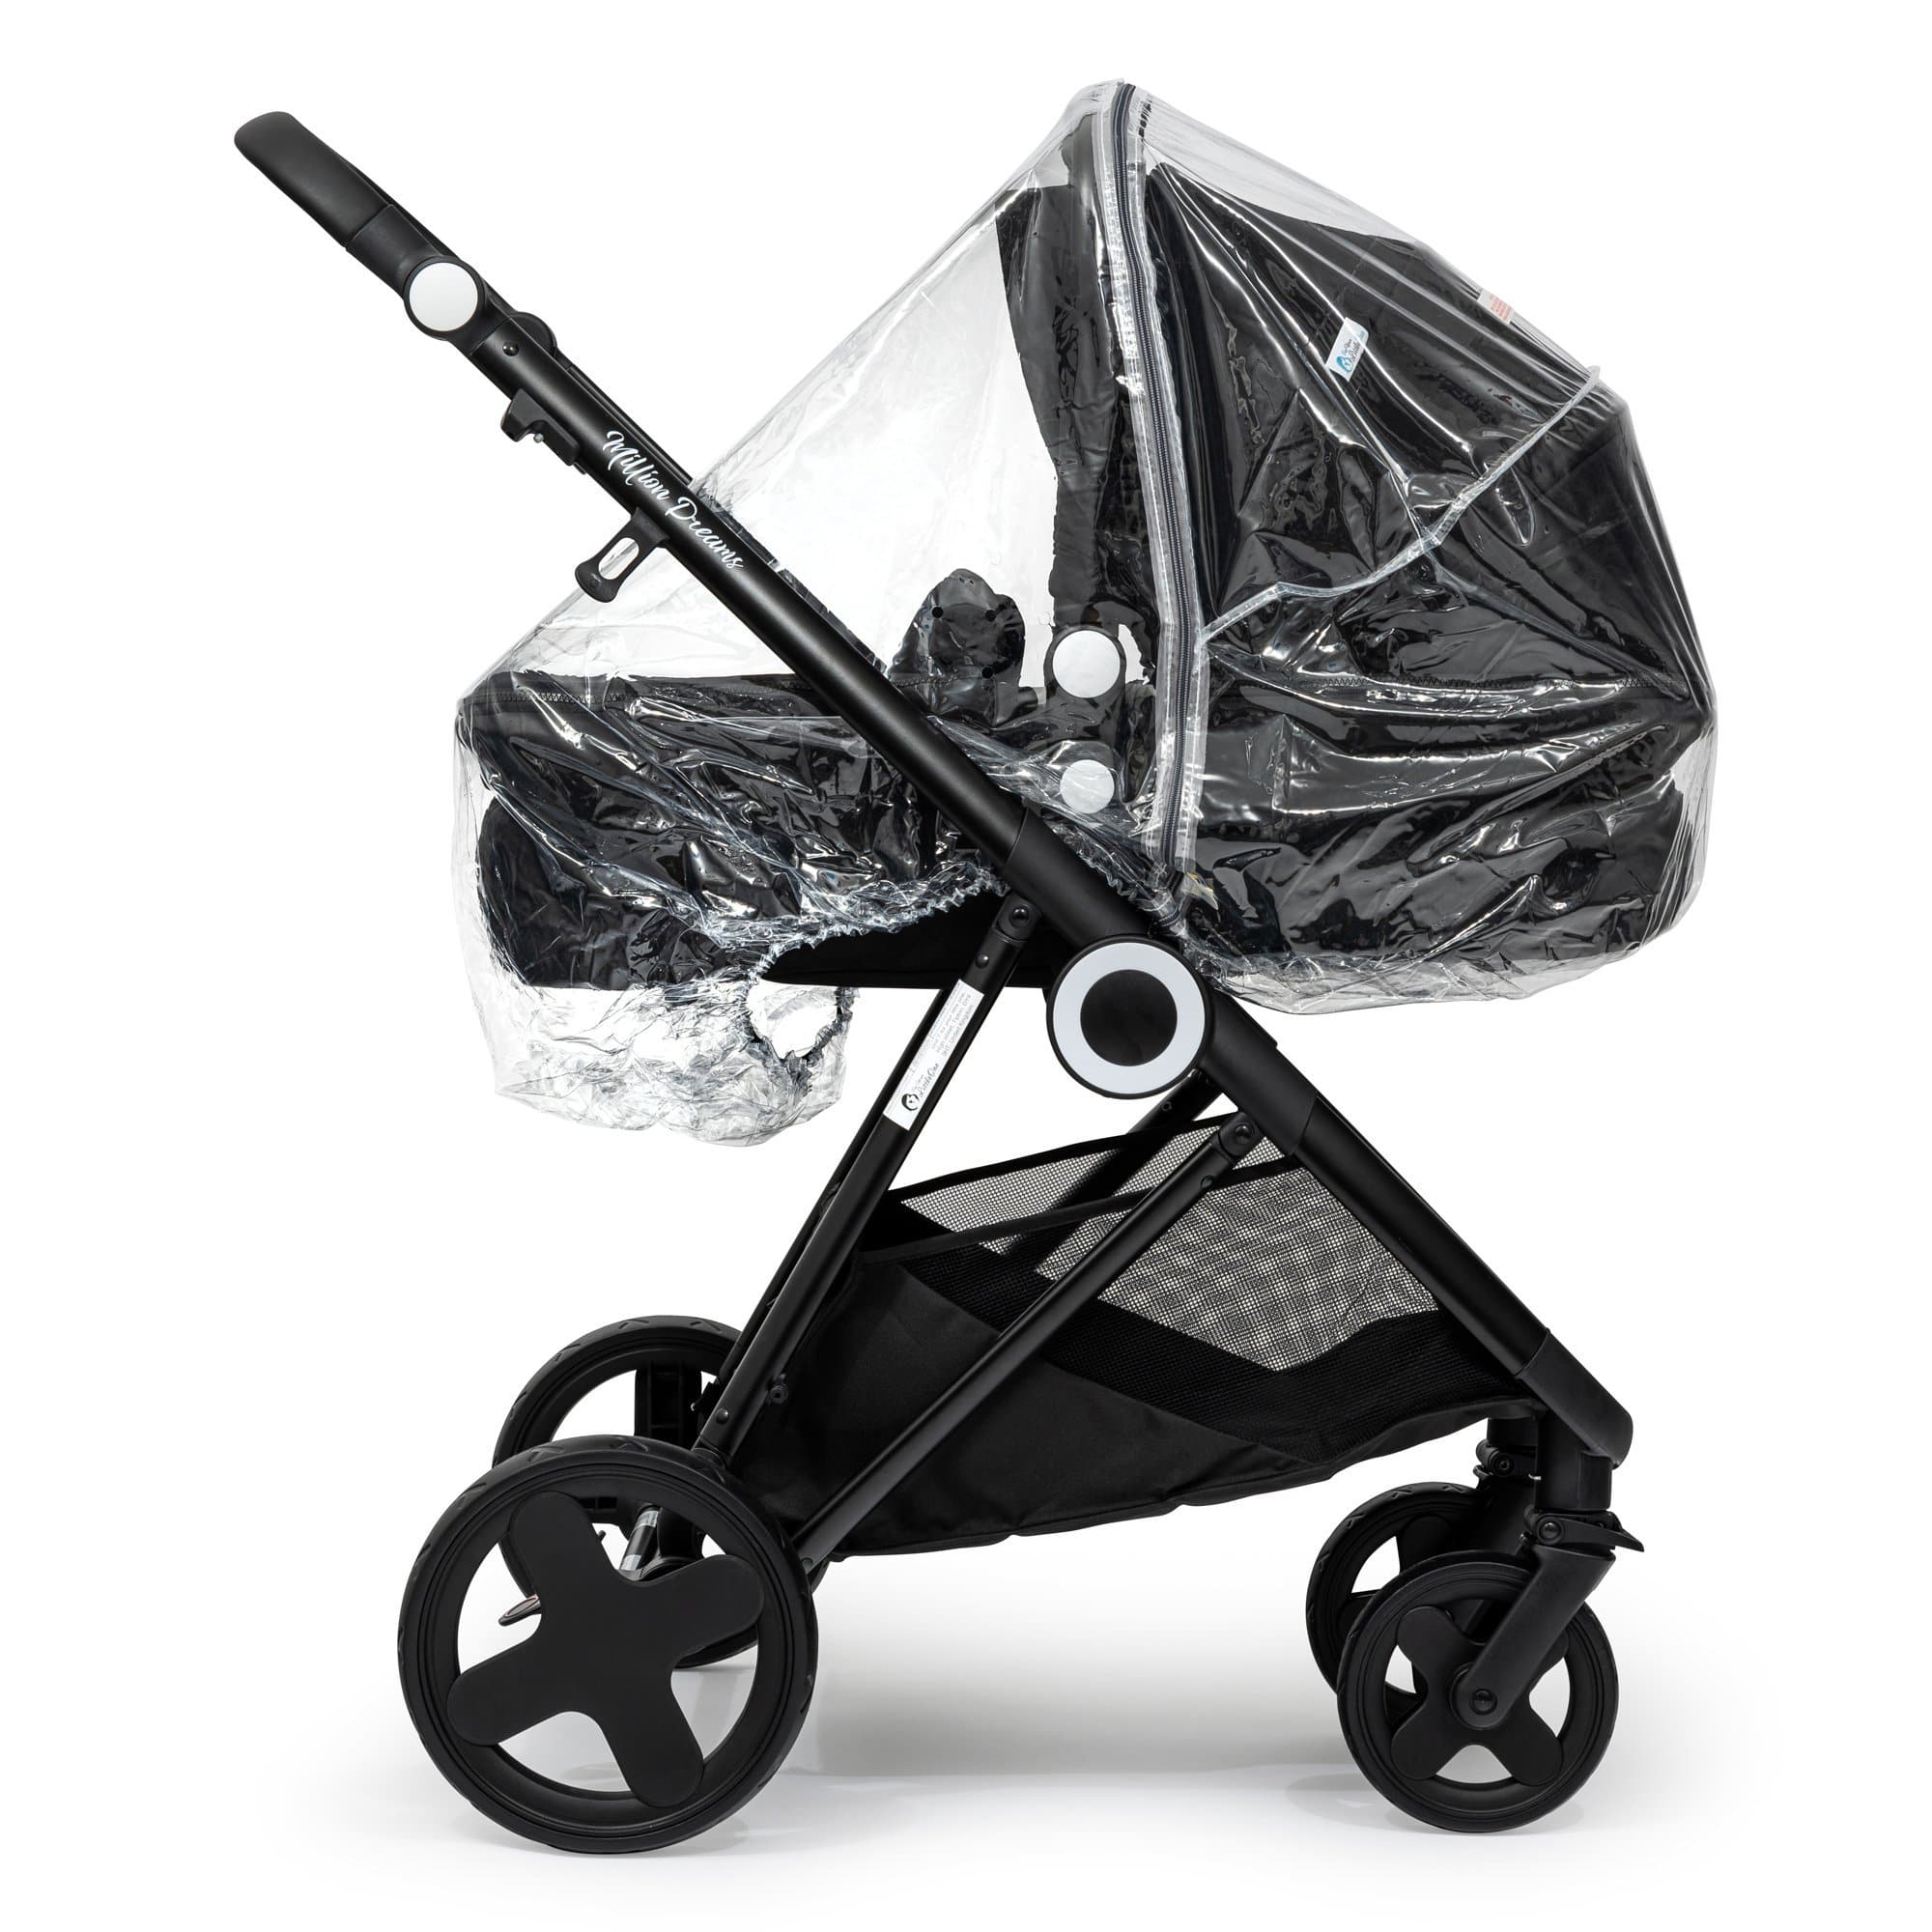 2 in 1 Rain Cover Compatible with Nania - Fits All Models - For Your Little One